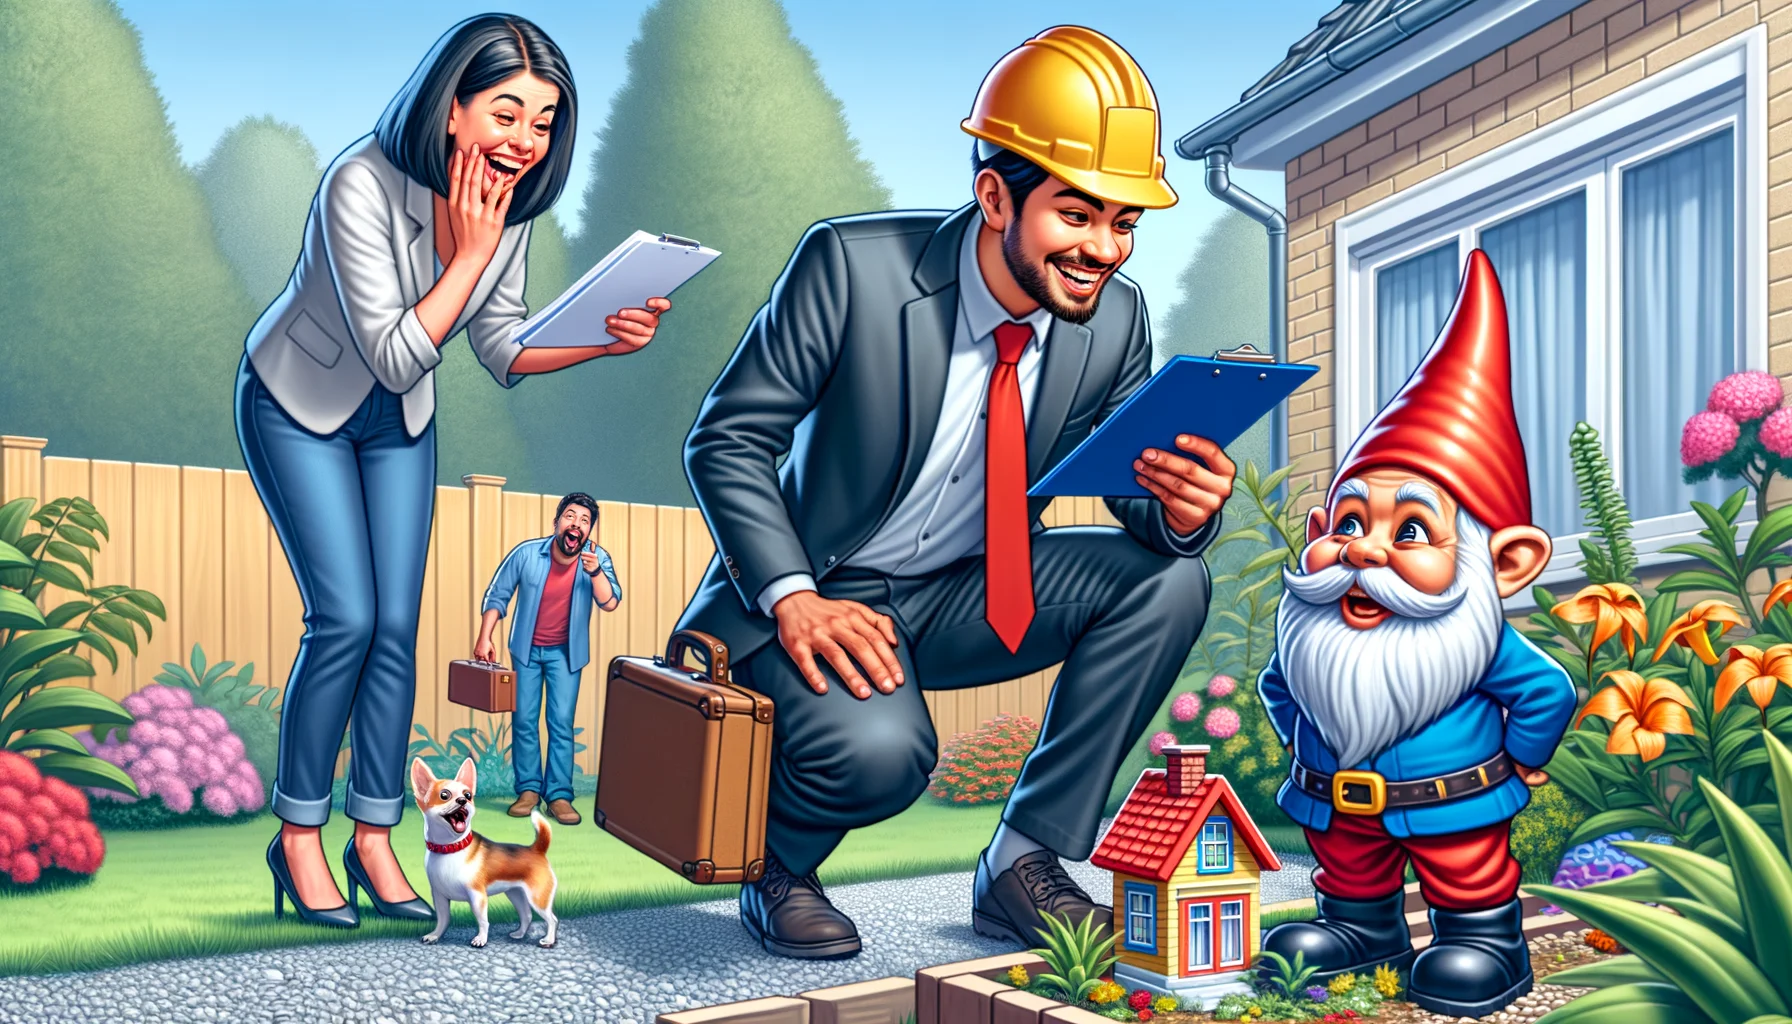 Create a vivid and entertaining illustration in the style of realism. Showcase a scene with a South Asian male home inspector wearing the traditional uniform, complete with a hard hat and a clipboard, humorously inspecting a gnome house in a garden. Meanwhile, a Caucasian female homeowner, laughing, points this out to her Hispanic male partner who's holding their small, excited dog. This comical scene twists the typical inspection as it shows the inspector deeply immersed in his job, unintentionally ignoring the actual human-sized house in the background.